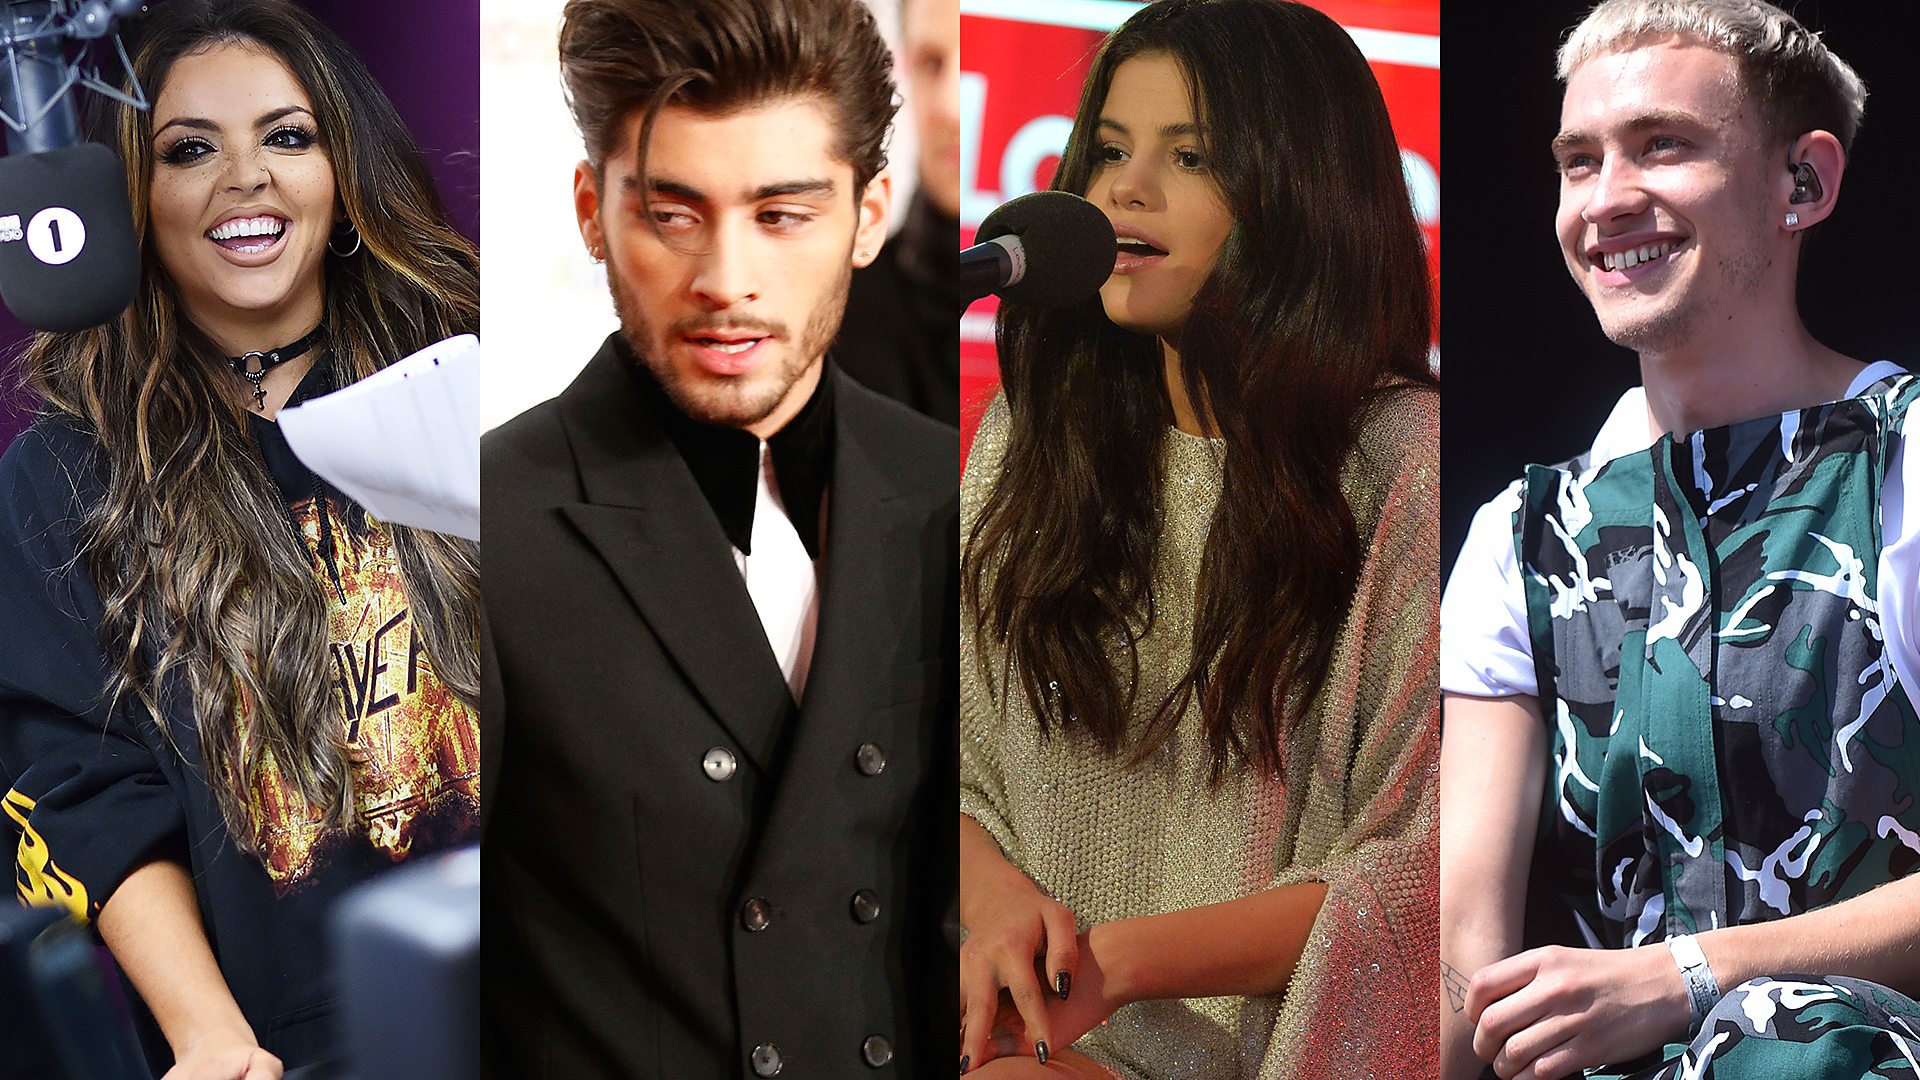 Celebs who hate bullying